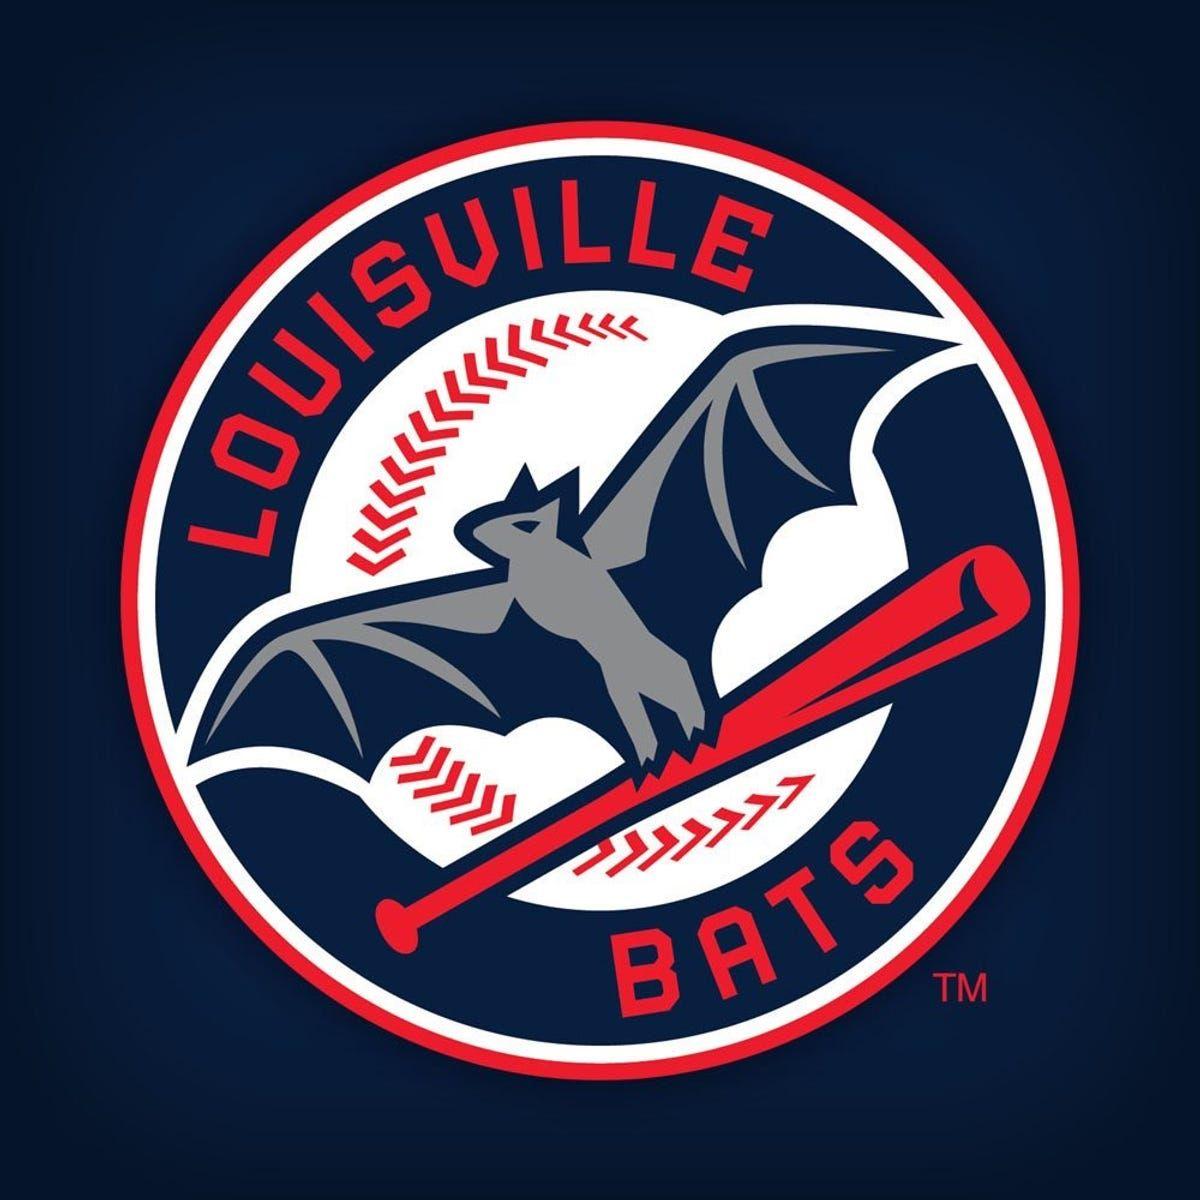 Bats Logo - Louisville Bats return to roots with new logo, old color for Reds